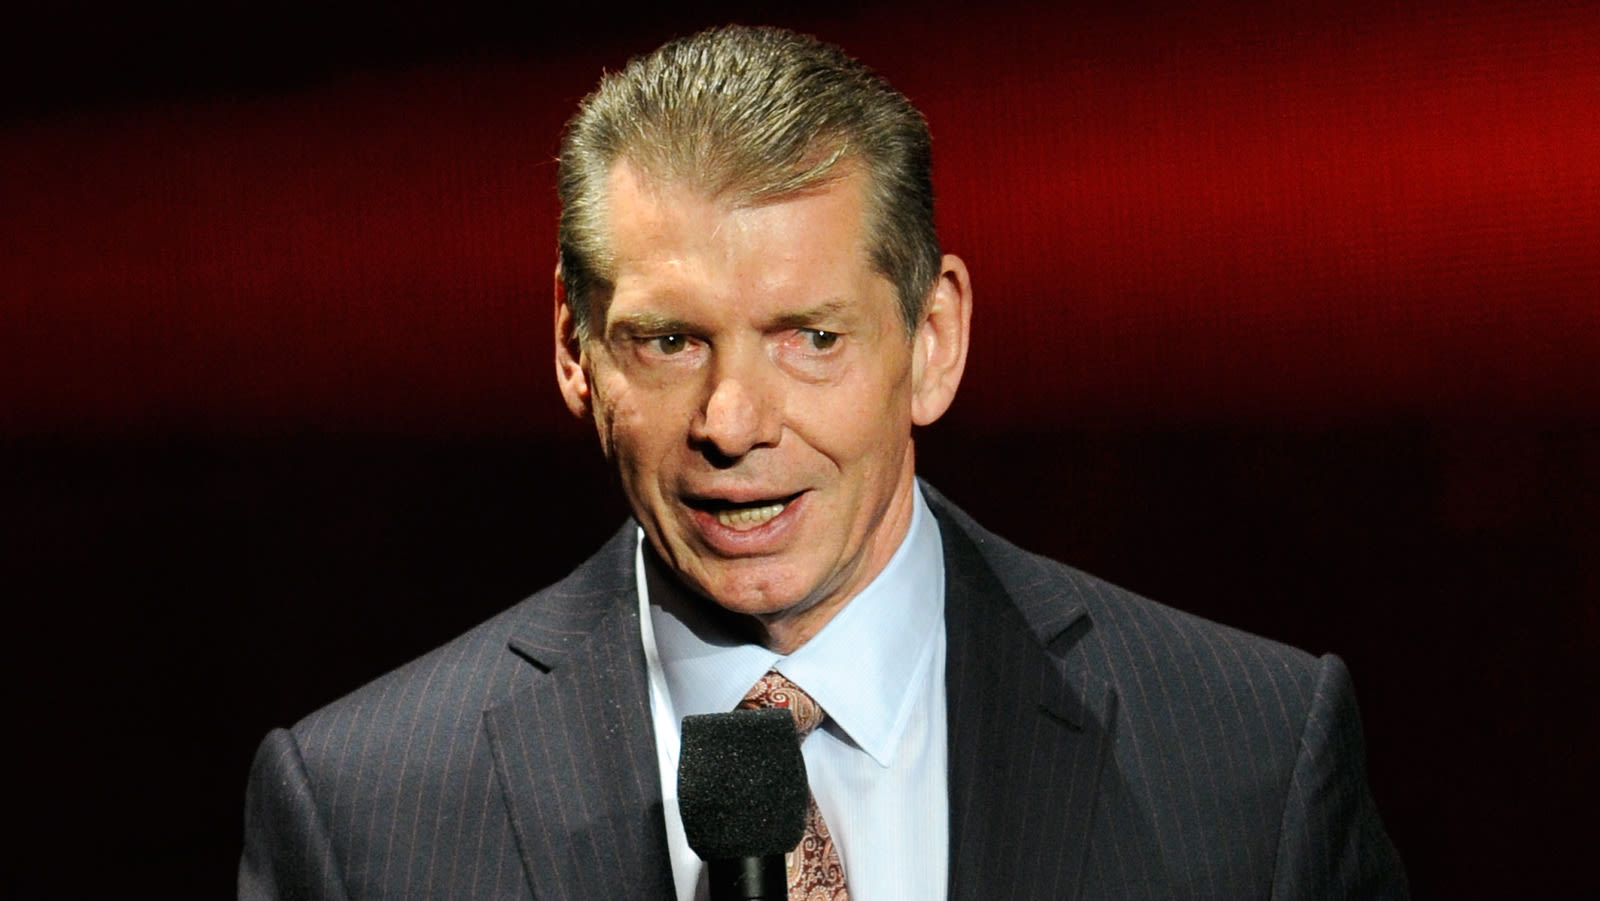 Janel Grant Seeking Medical Records In Lawsuit Against Former WWE Head Vince McMahon - Wrestling Inc.